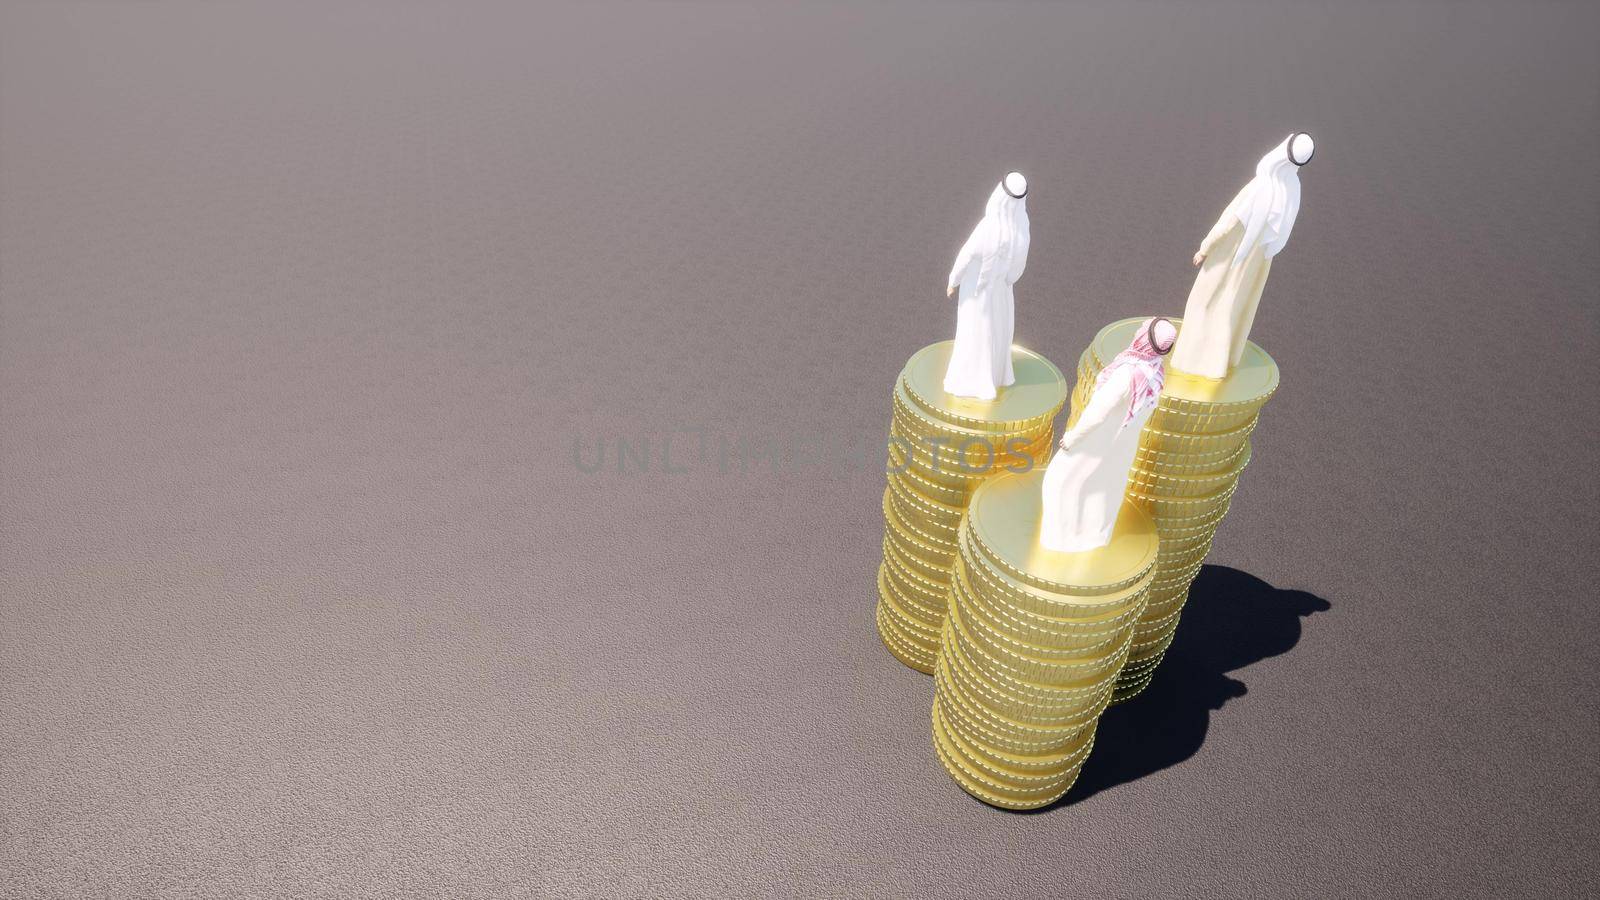 Arabic arabs stand on gold coins currency money 3d render